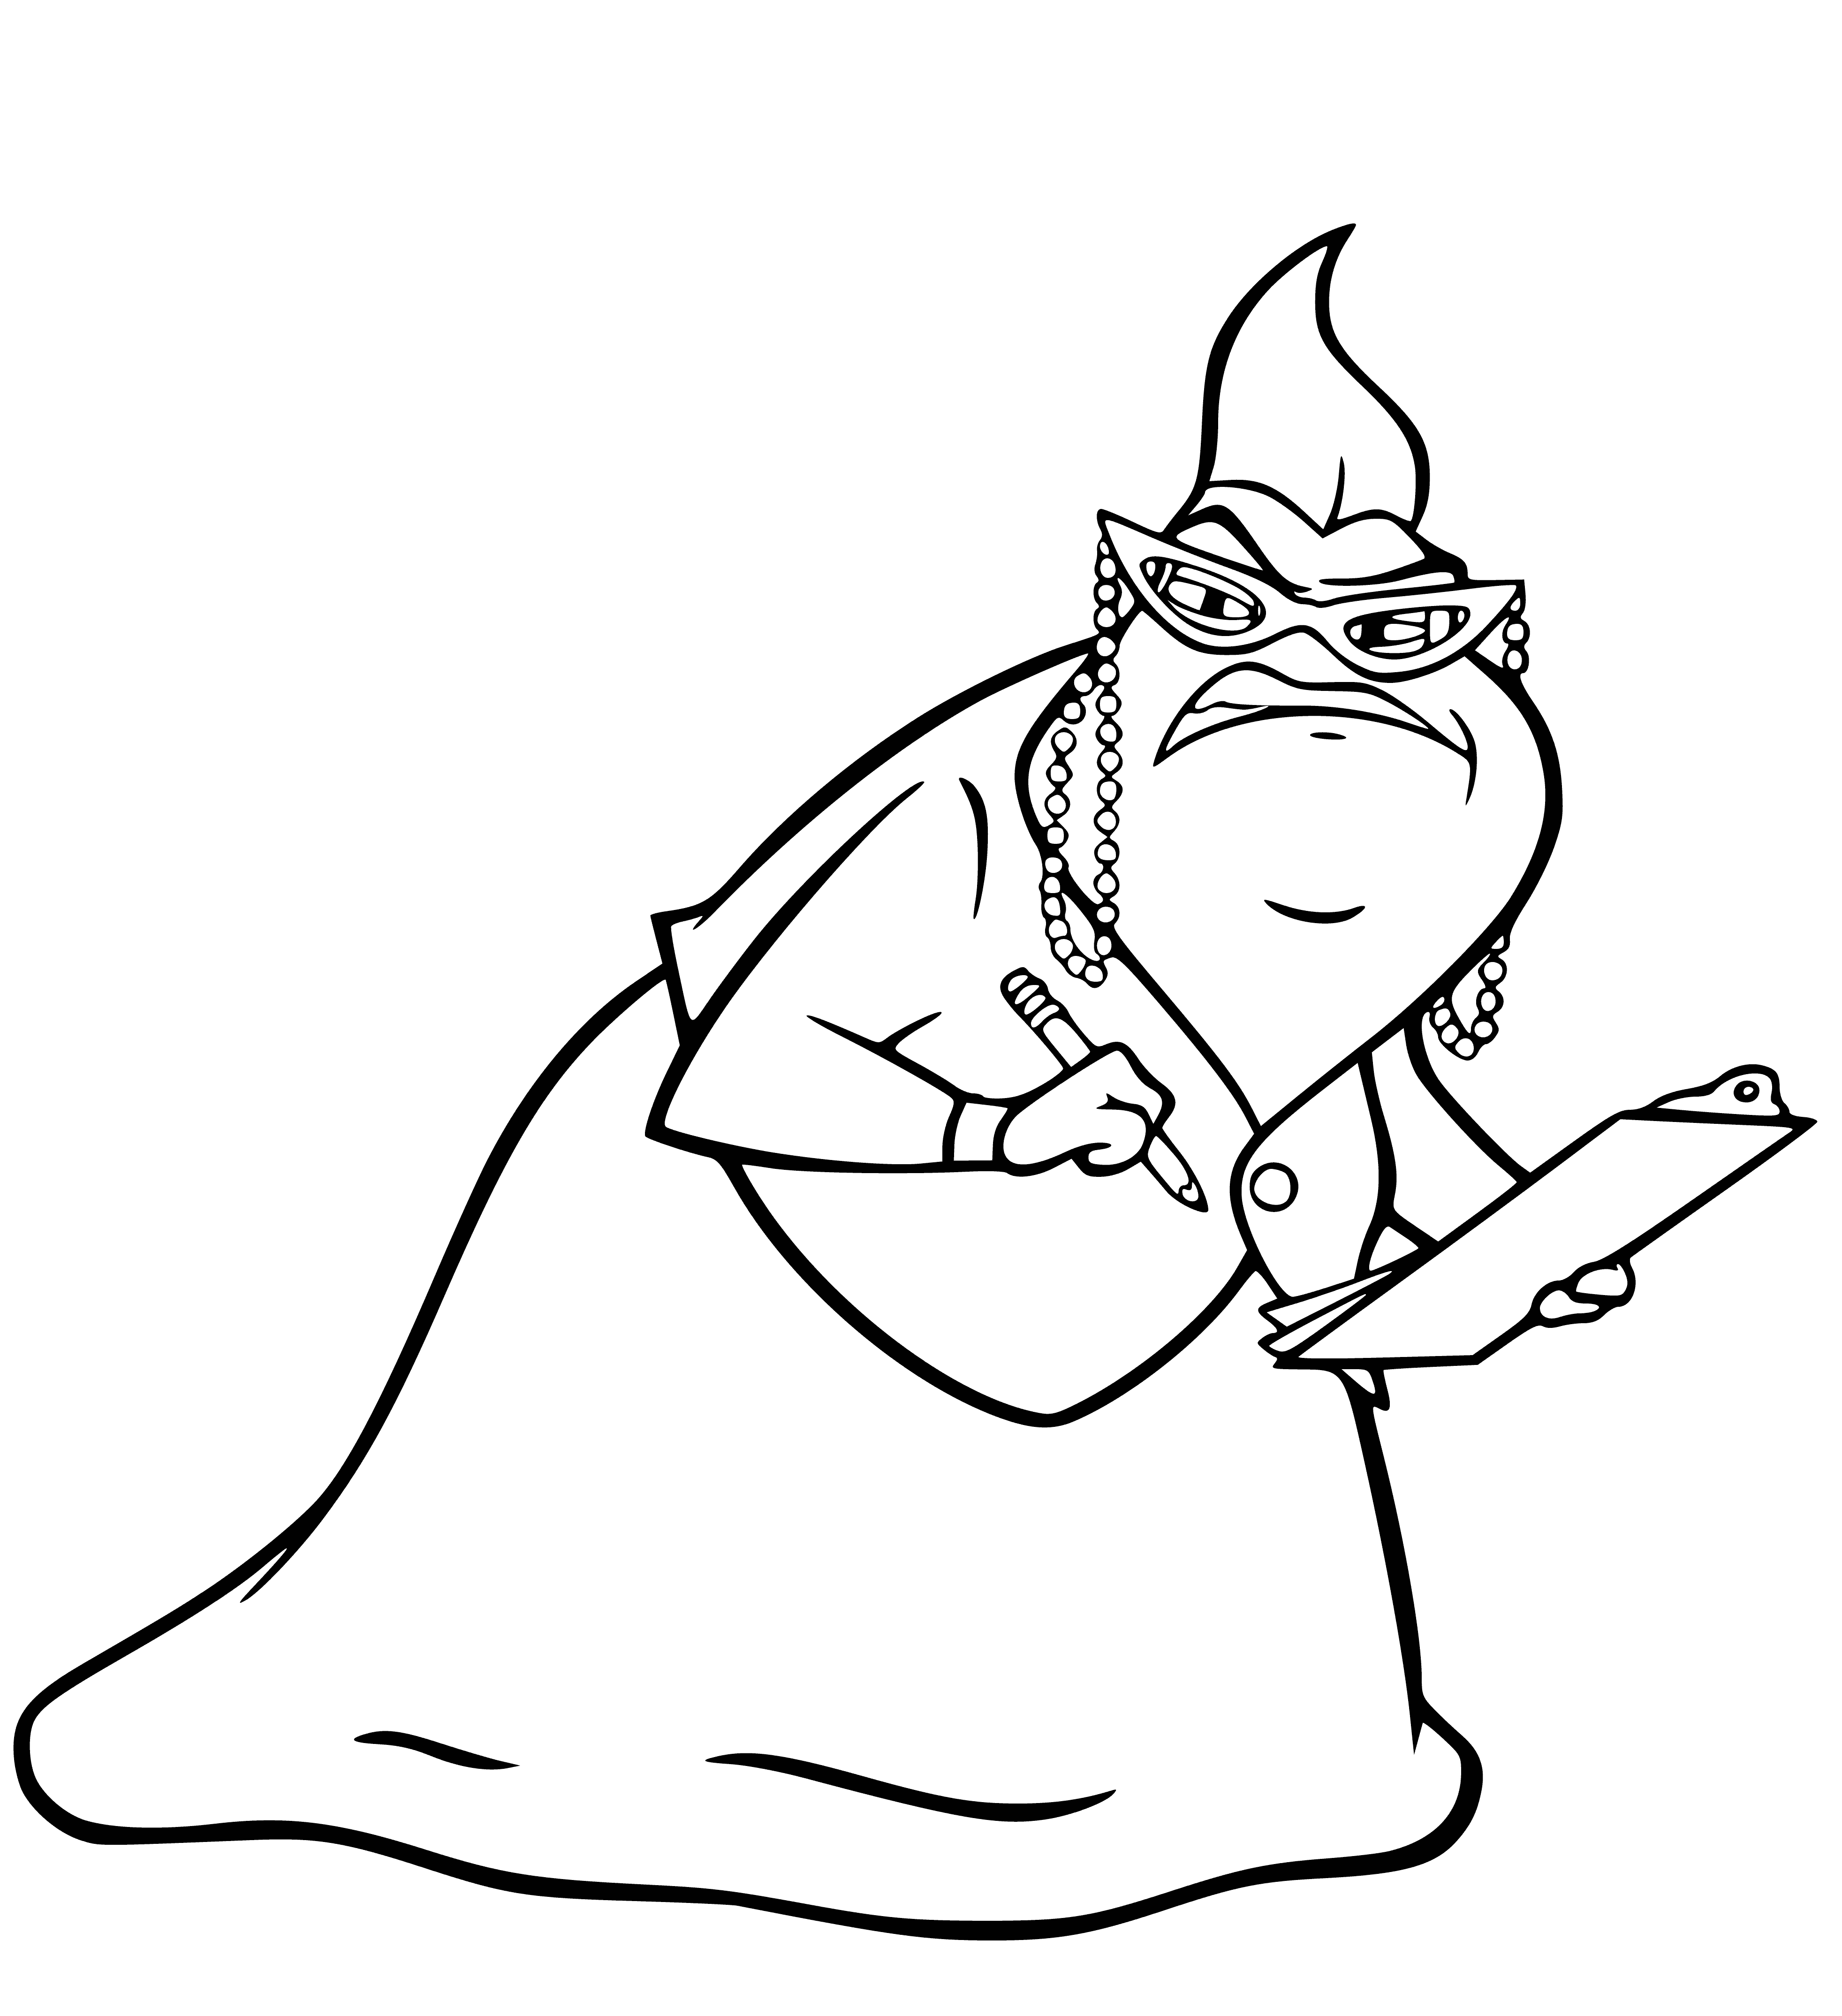 Angry aunt coloring page